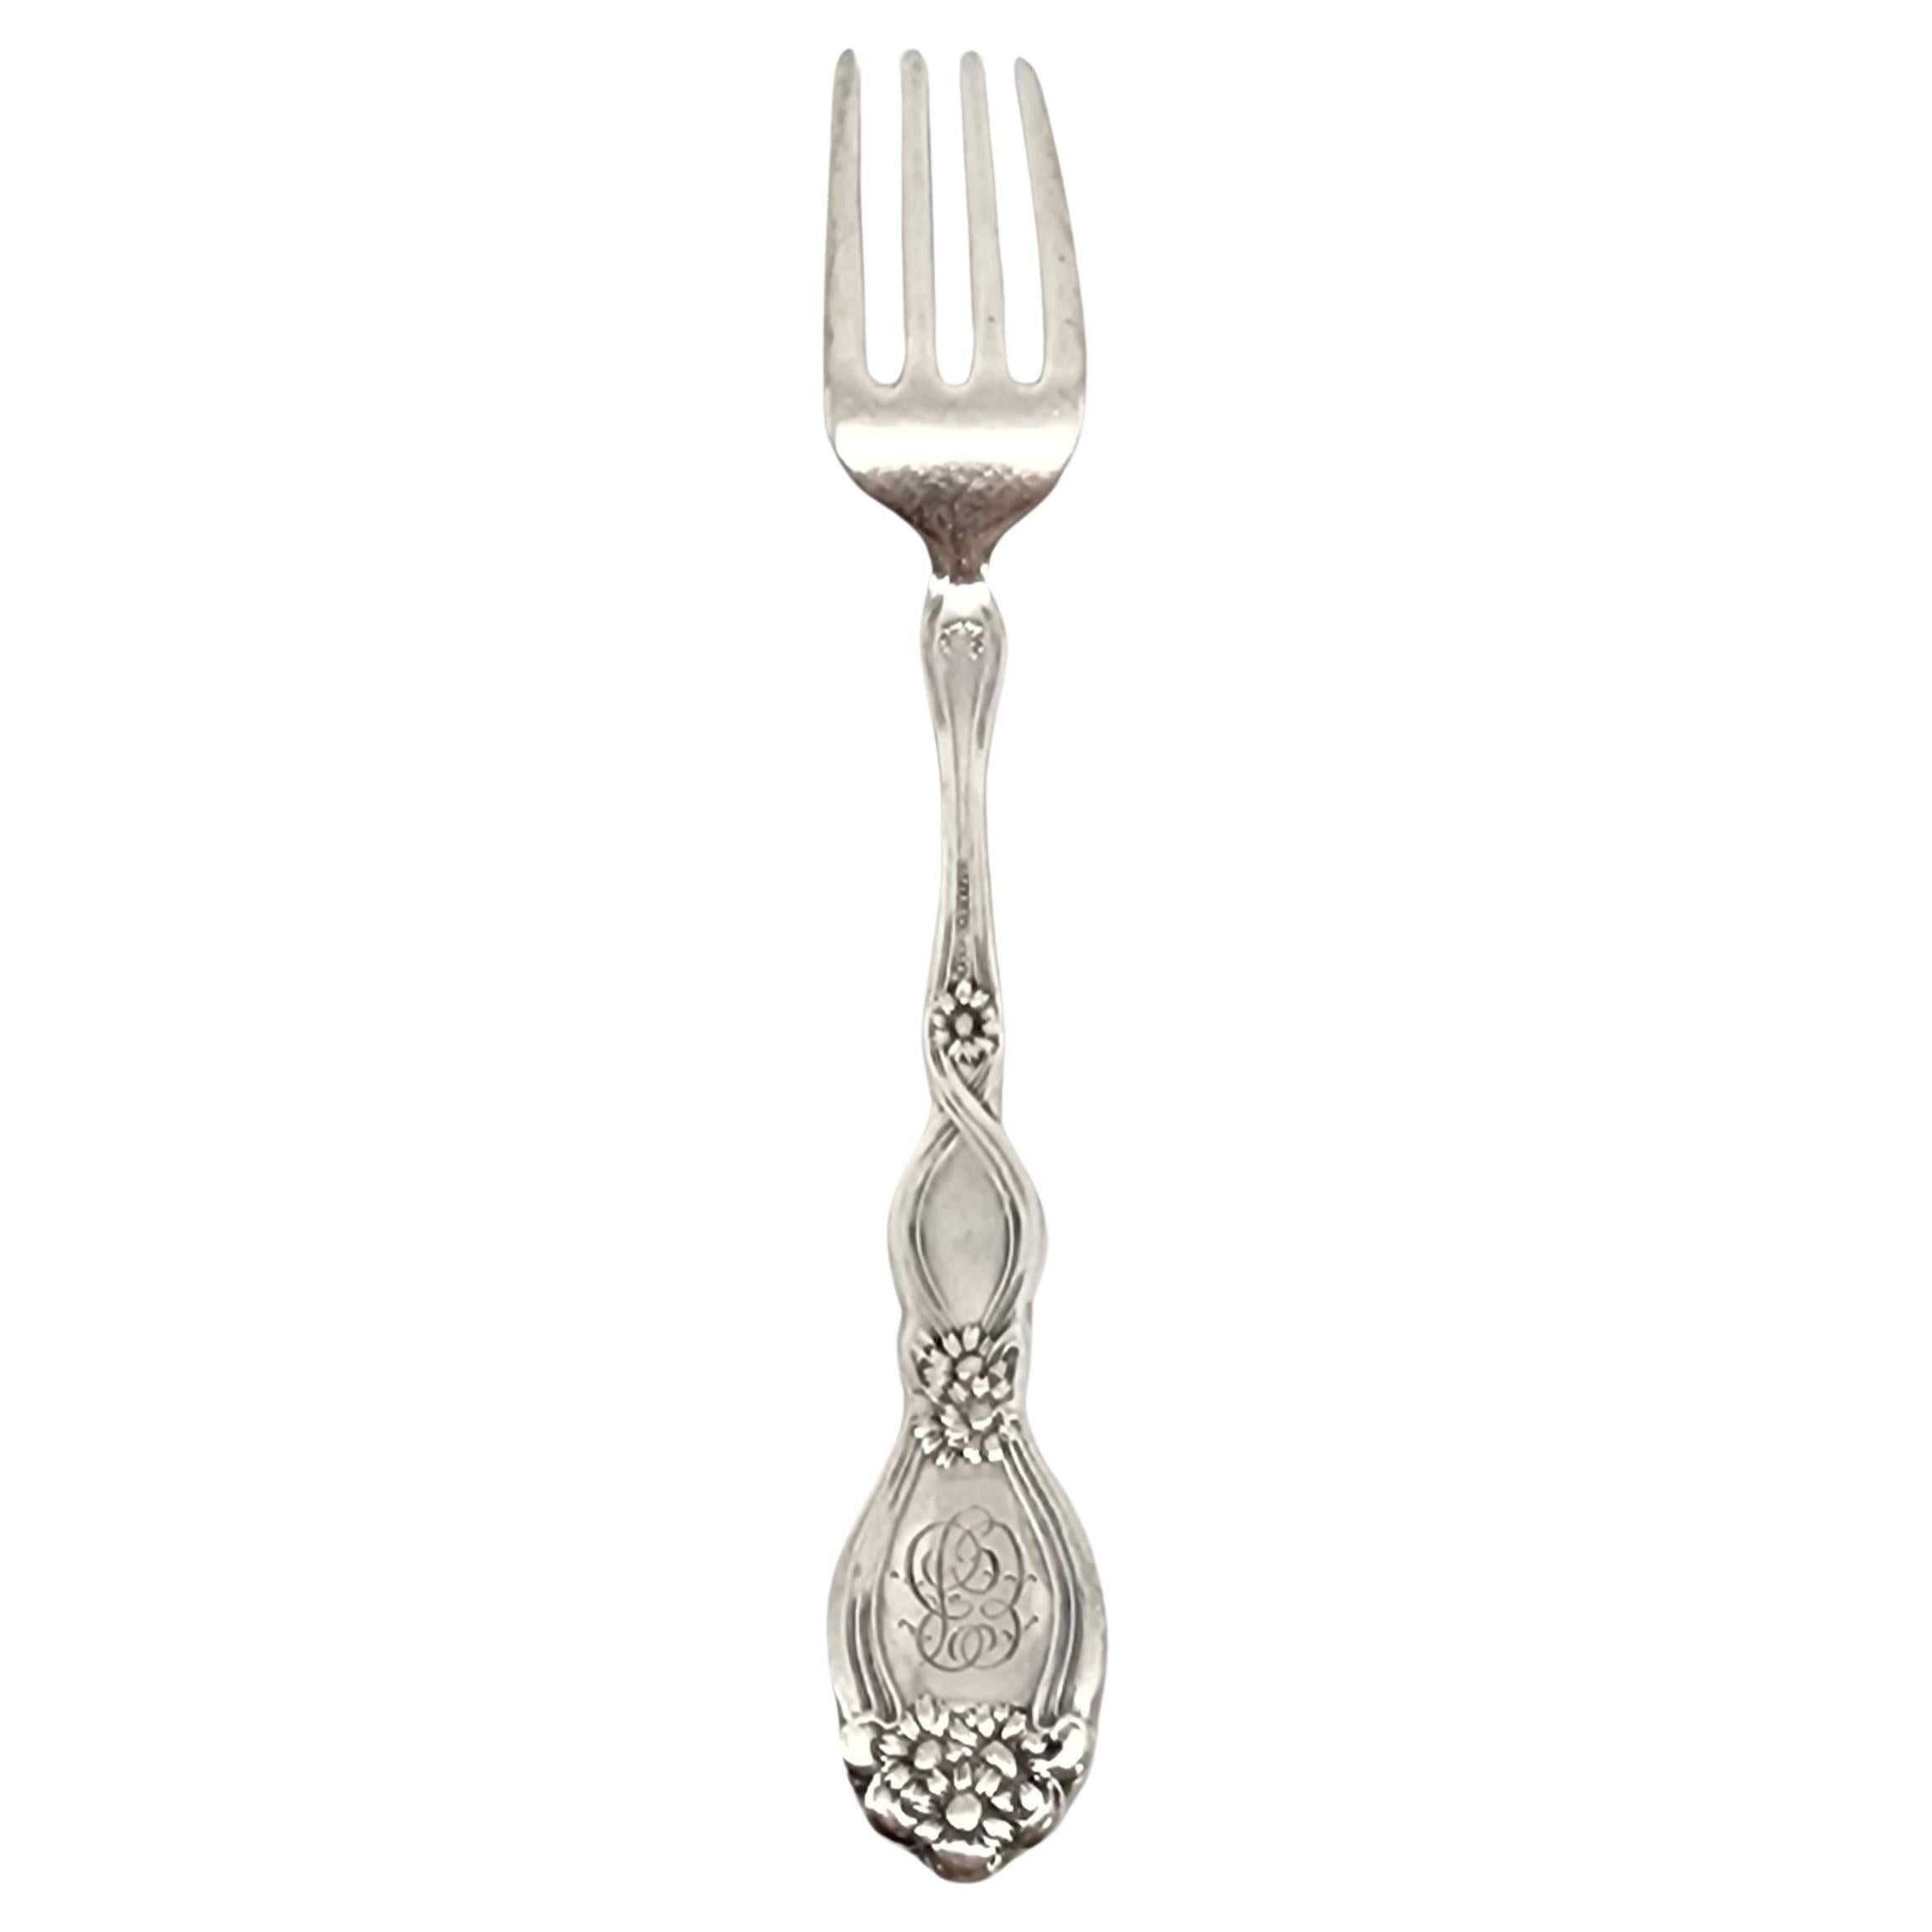 Sterling silver fork by Unger Brothers in the He Loves Me pattern, with monogram, circa 1904.

Monogram appears to be EB (on the back of the handle)

This fork features a girl on profile in flowers, with flower detail on the back of the